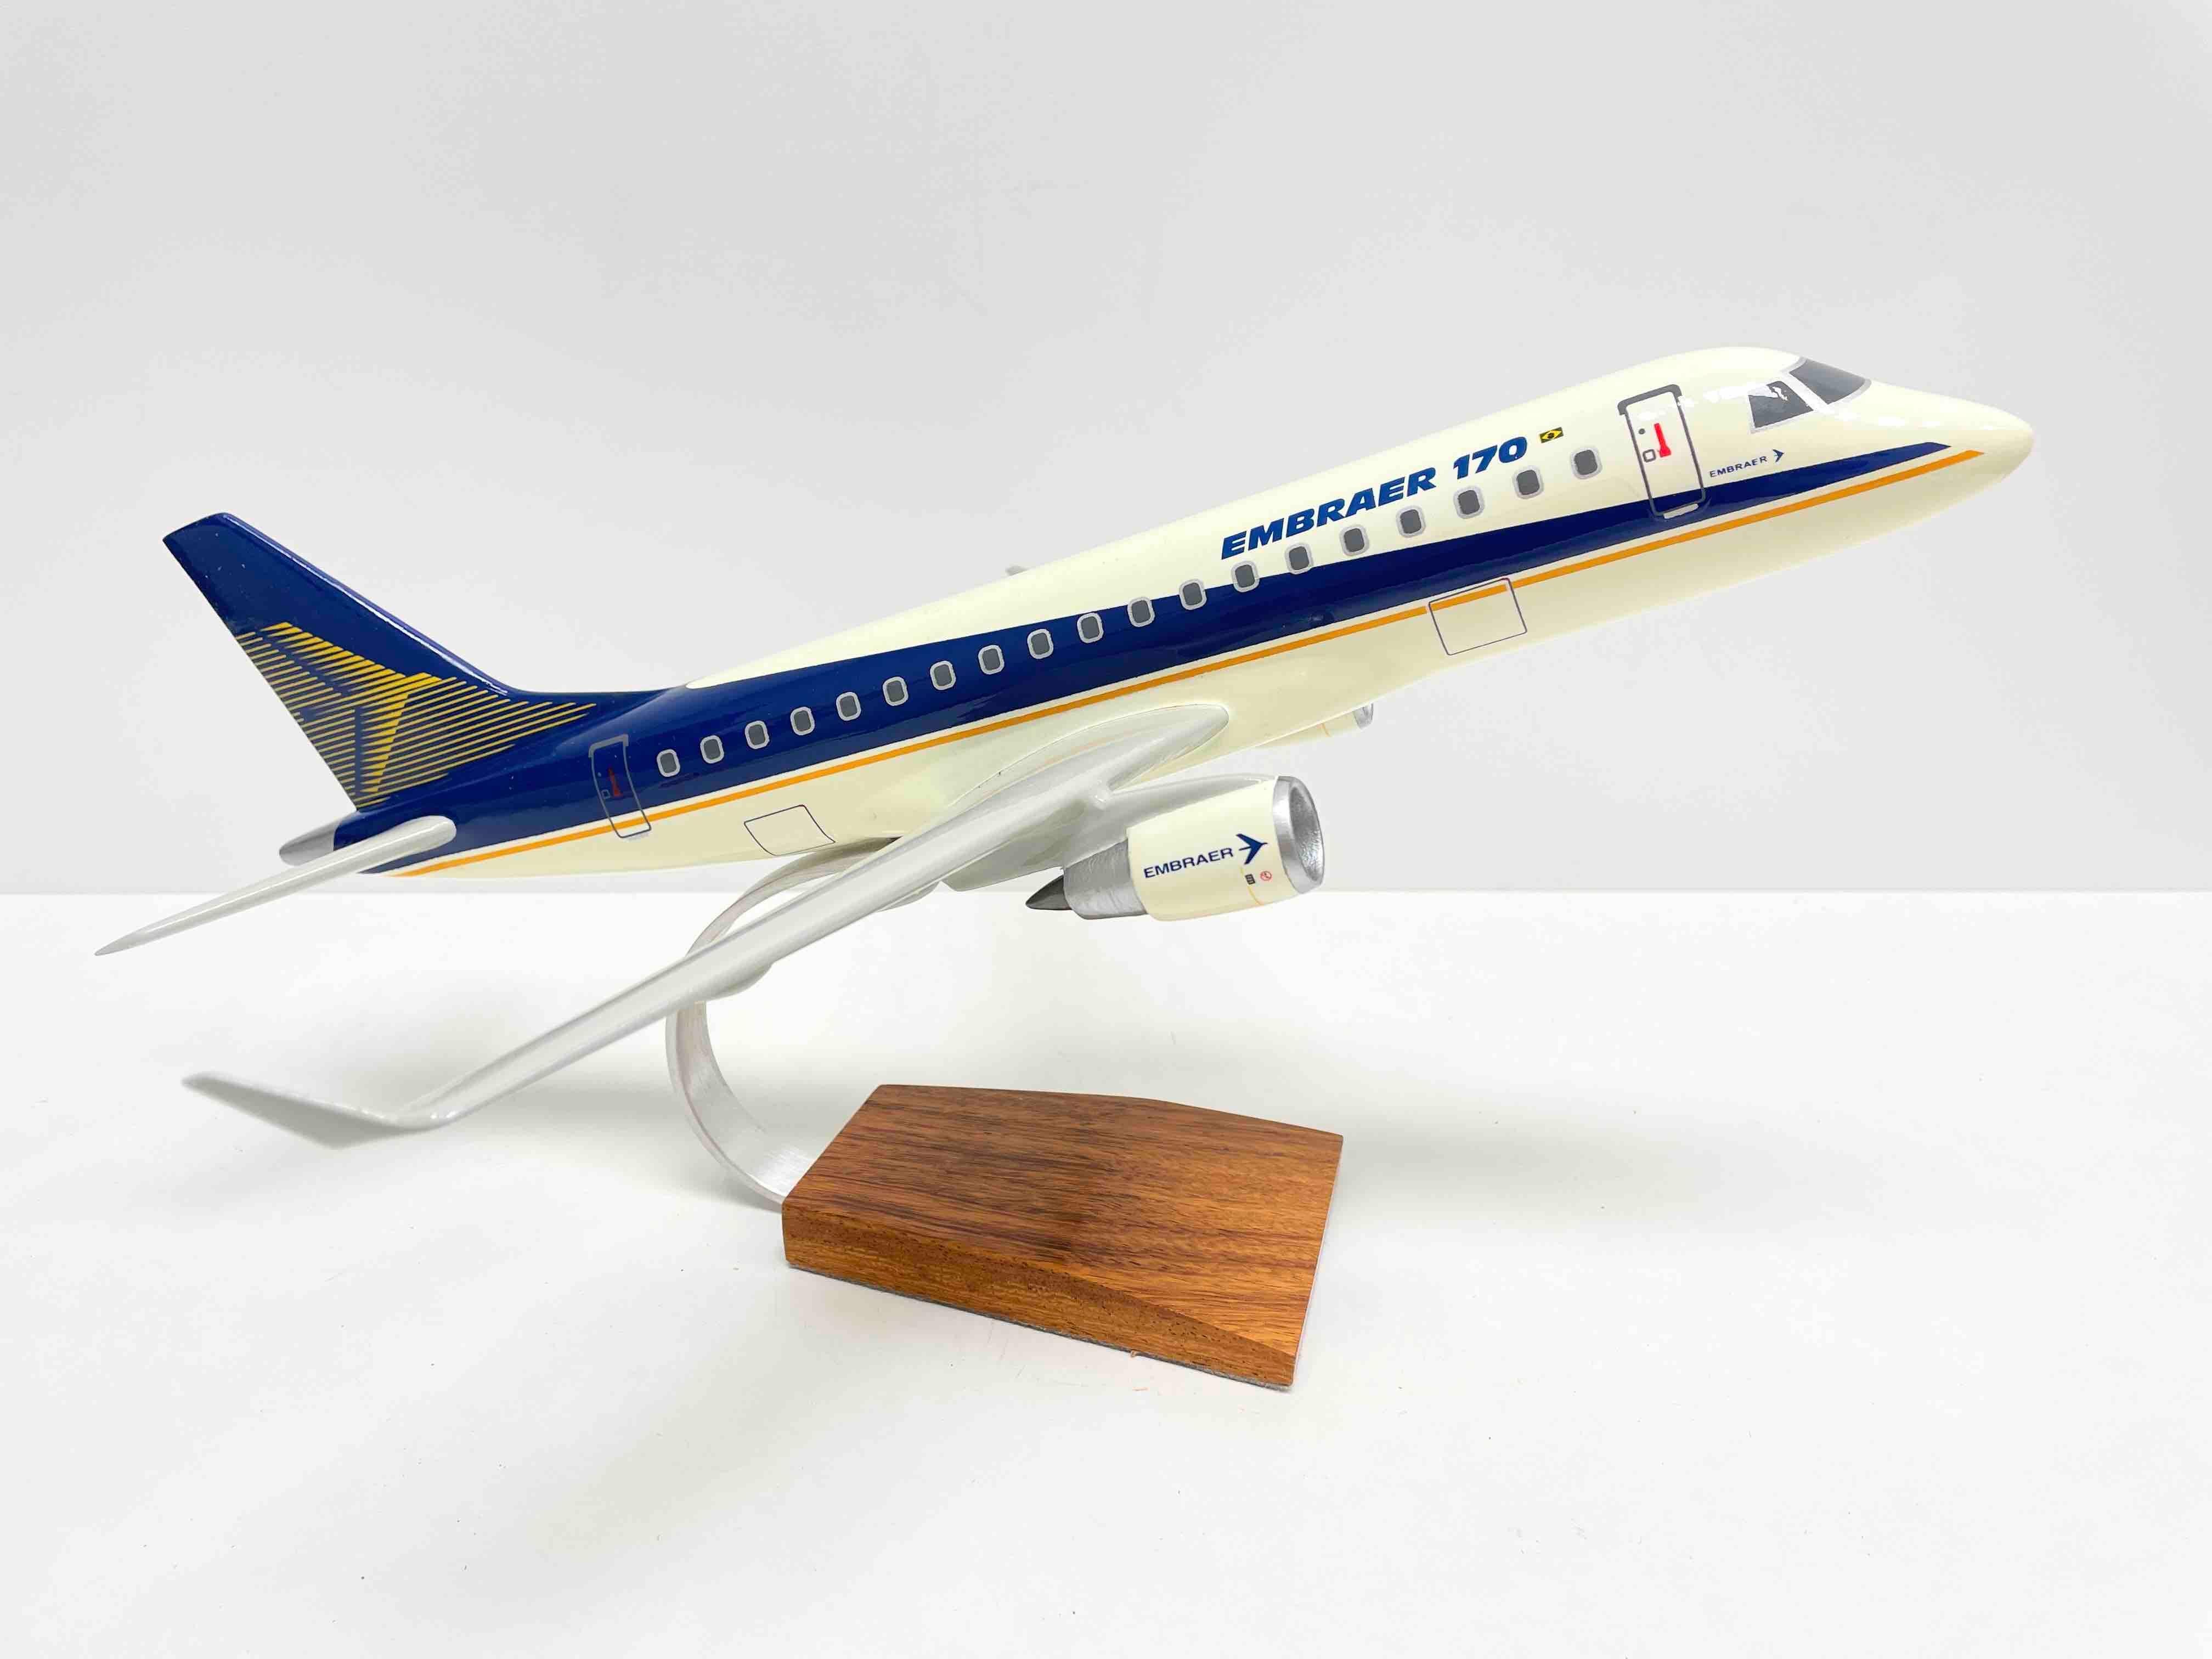 Scaled model of the Embraer 170 Jet. Made of Wood in the Scale of 1/75. This exquisite Embraer 170 Model is handcrafted by a master craftsmen from the finest Wood. Attention is given to every detail, resulting in unsurpassed quality. Models come